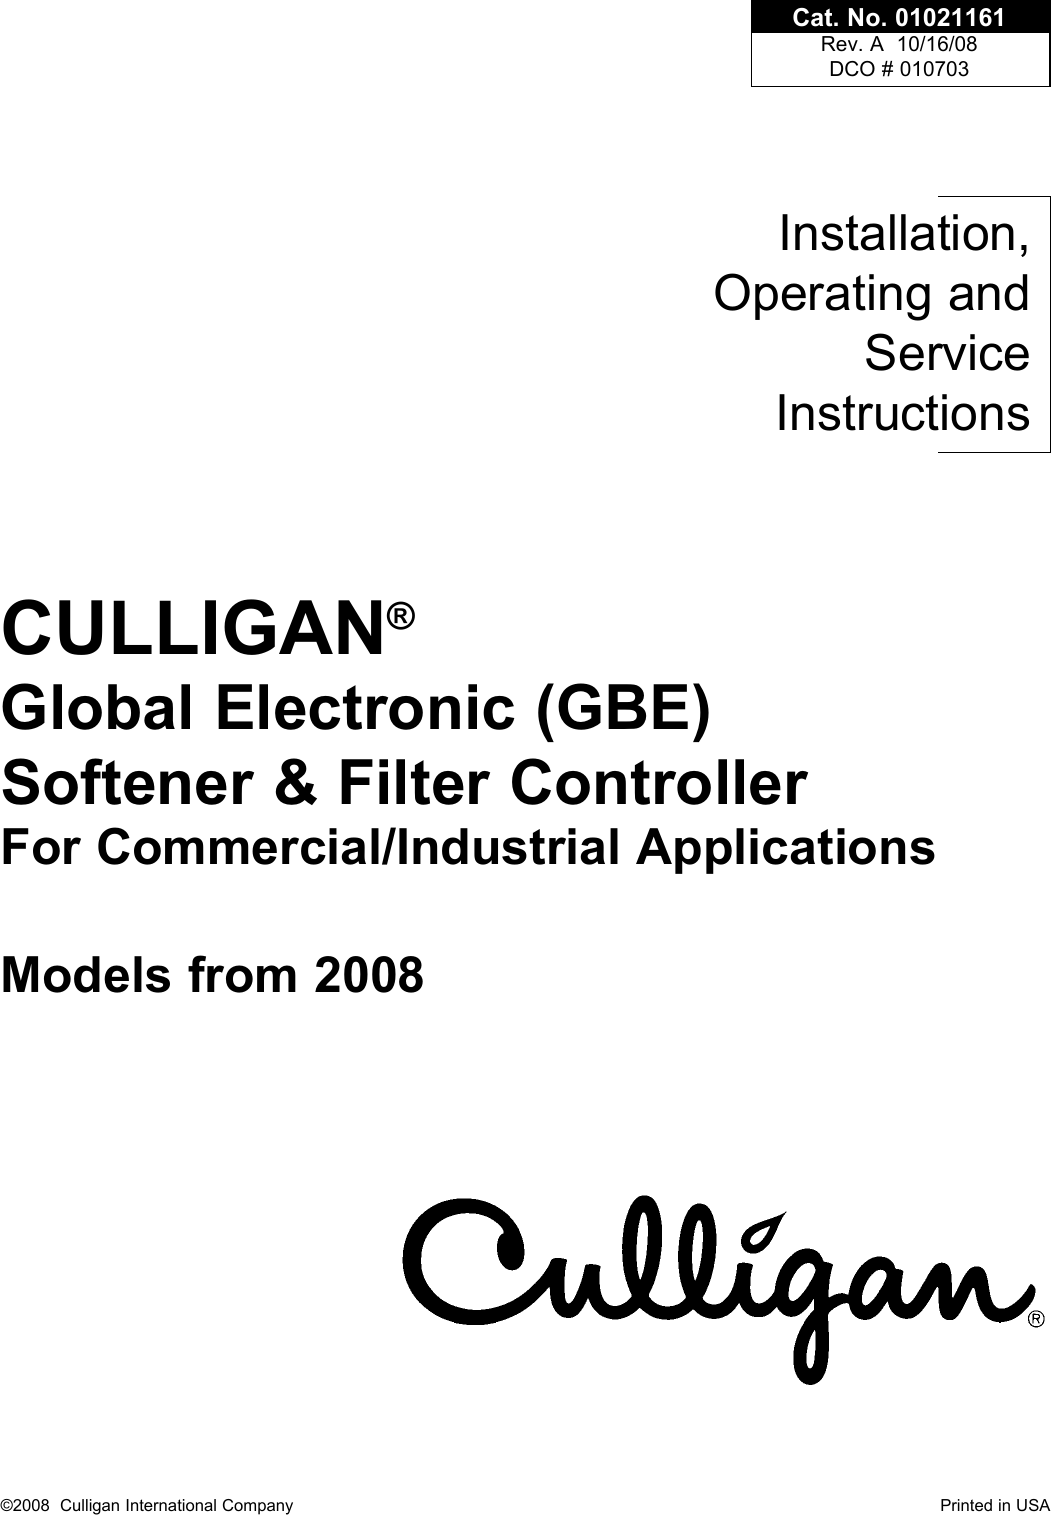 Culligan Water Softener System 23 Manual O Rings Doityourself Com Community Forums